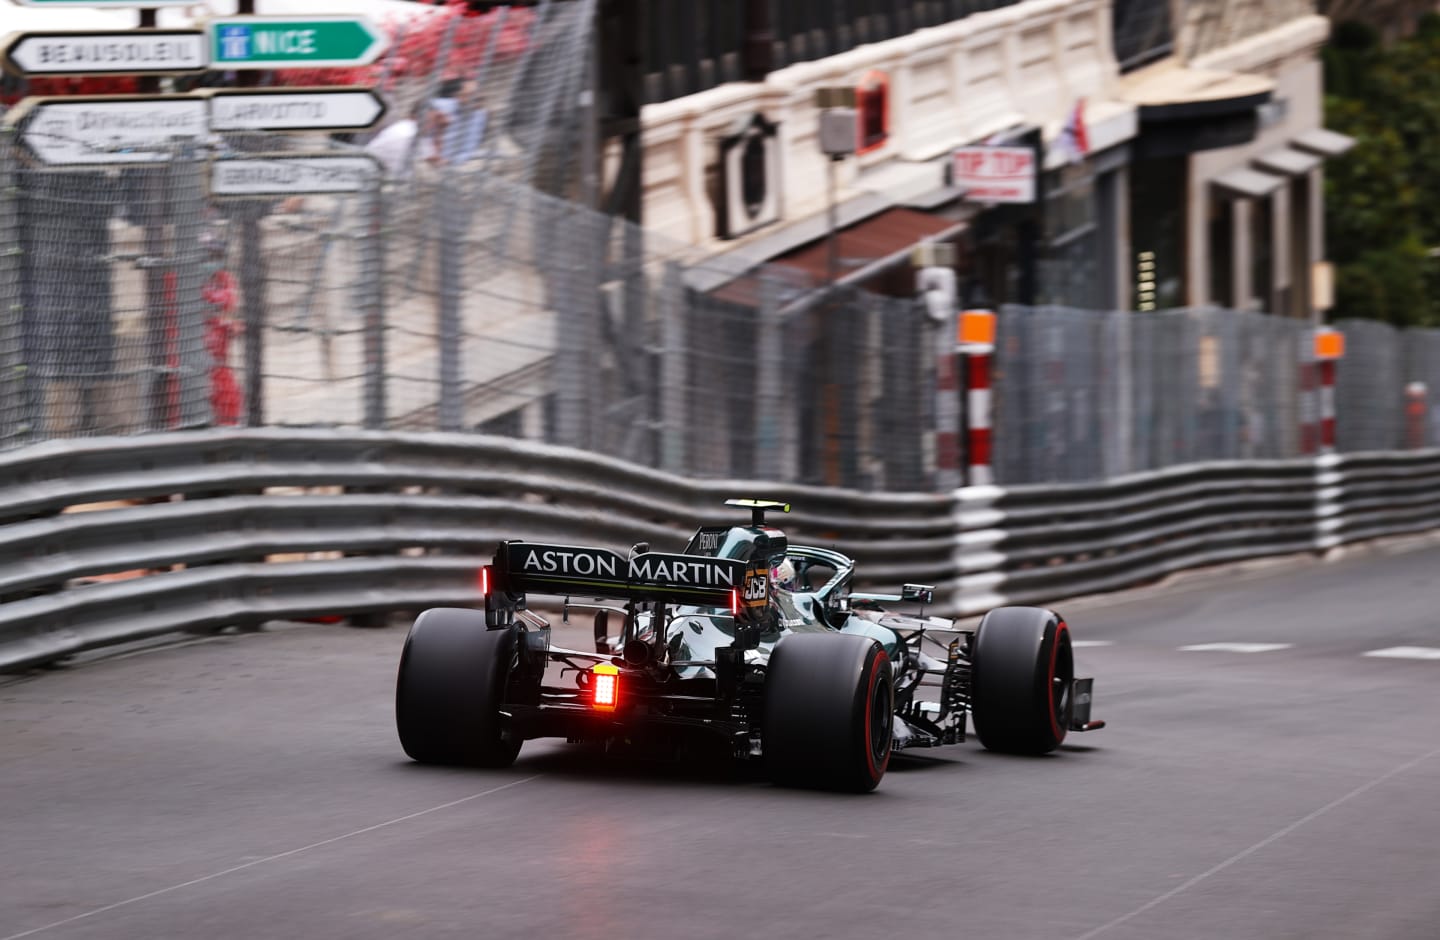 MONTE-CARLO, MONACO - MAY 22: Sebastian Vettel of Germany driving the (5) Aston Martin AMR21 Mercedes on track during final practice practice prior to the F1 Grand Prix of Monaco at Circuit de Monaco on May 22, 2021 in Monte-Carlo, Monaco. (Photo by Lars Baron/Getty Images)